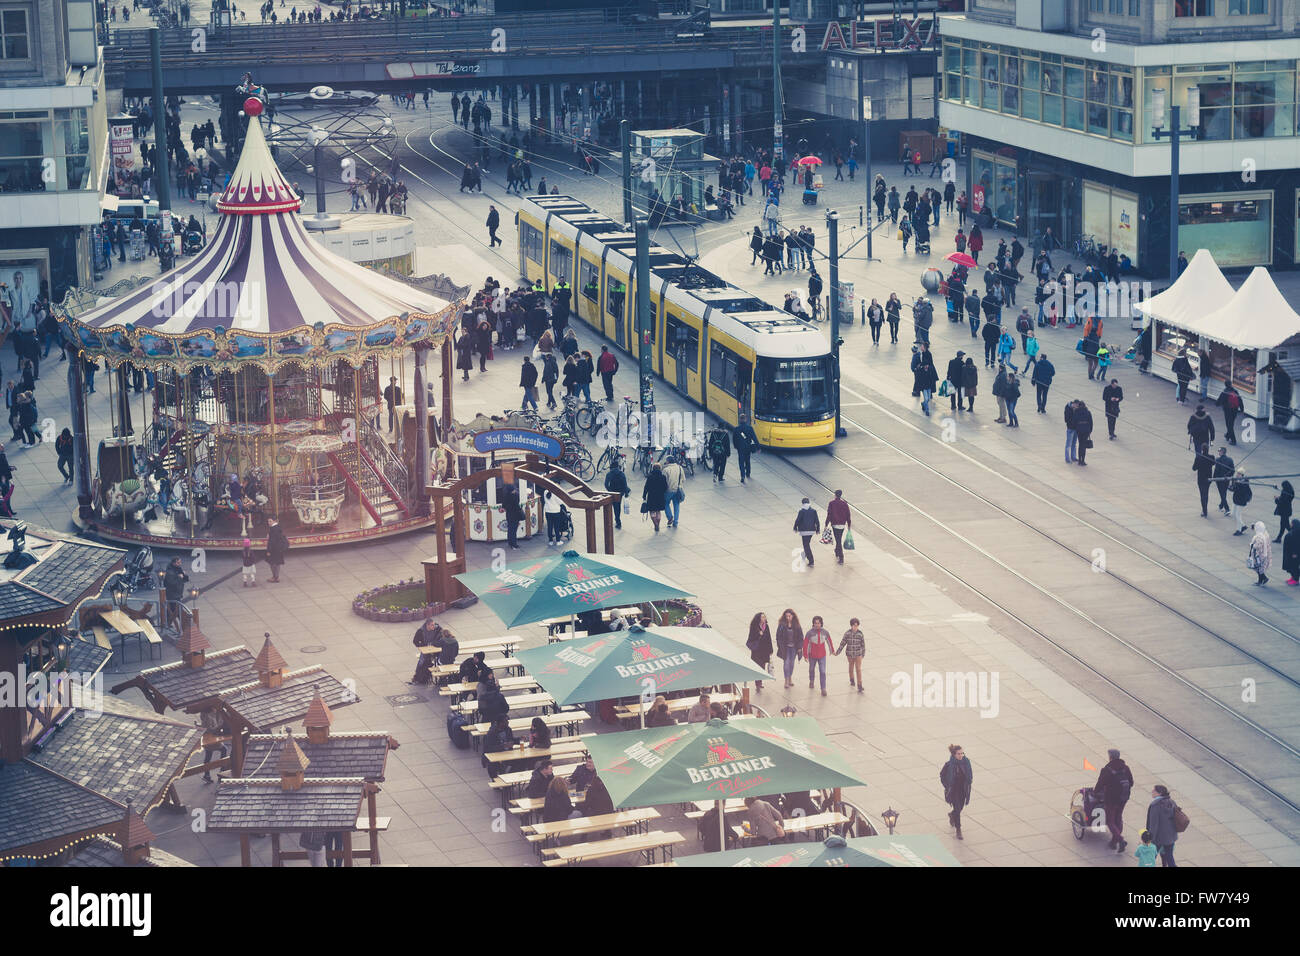 Berlin, Germany - march 30, 2016: People and trains at Alexanderplatz in berlin, germany from high viewpoint. Stock Photo